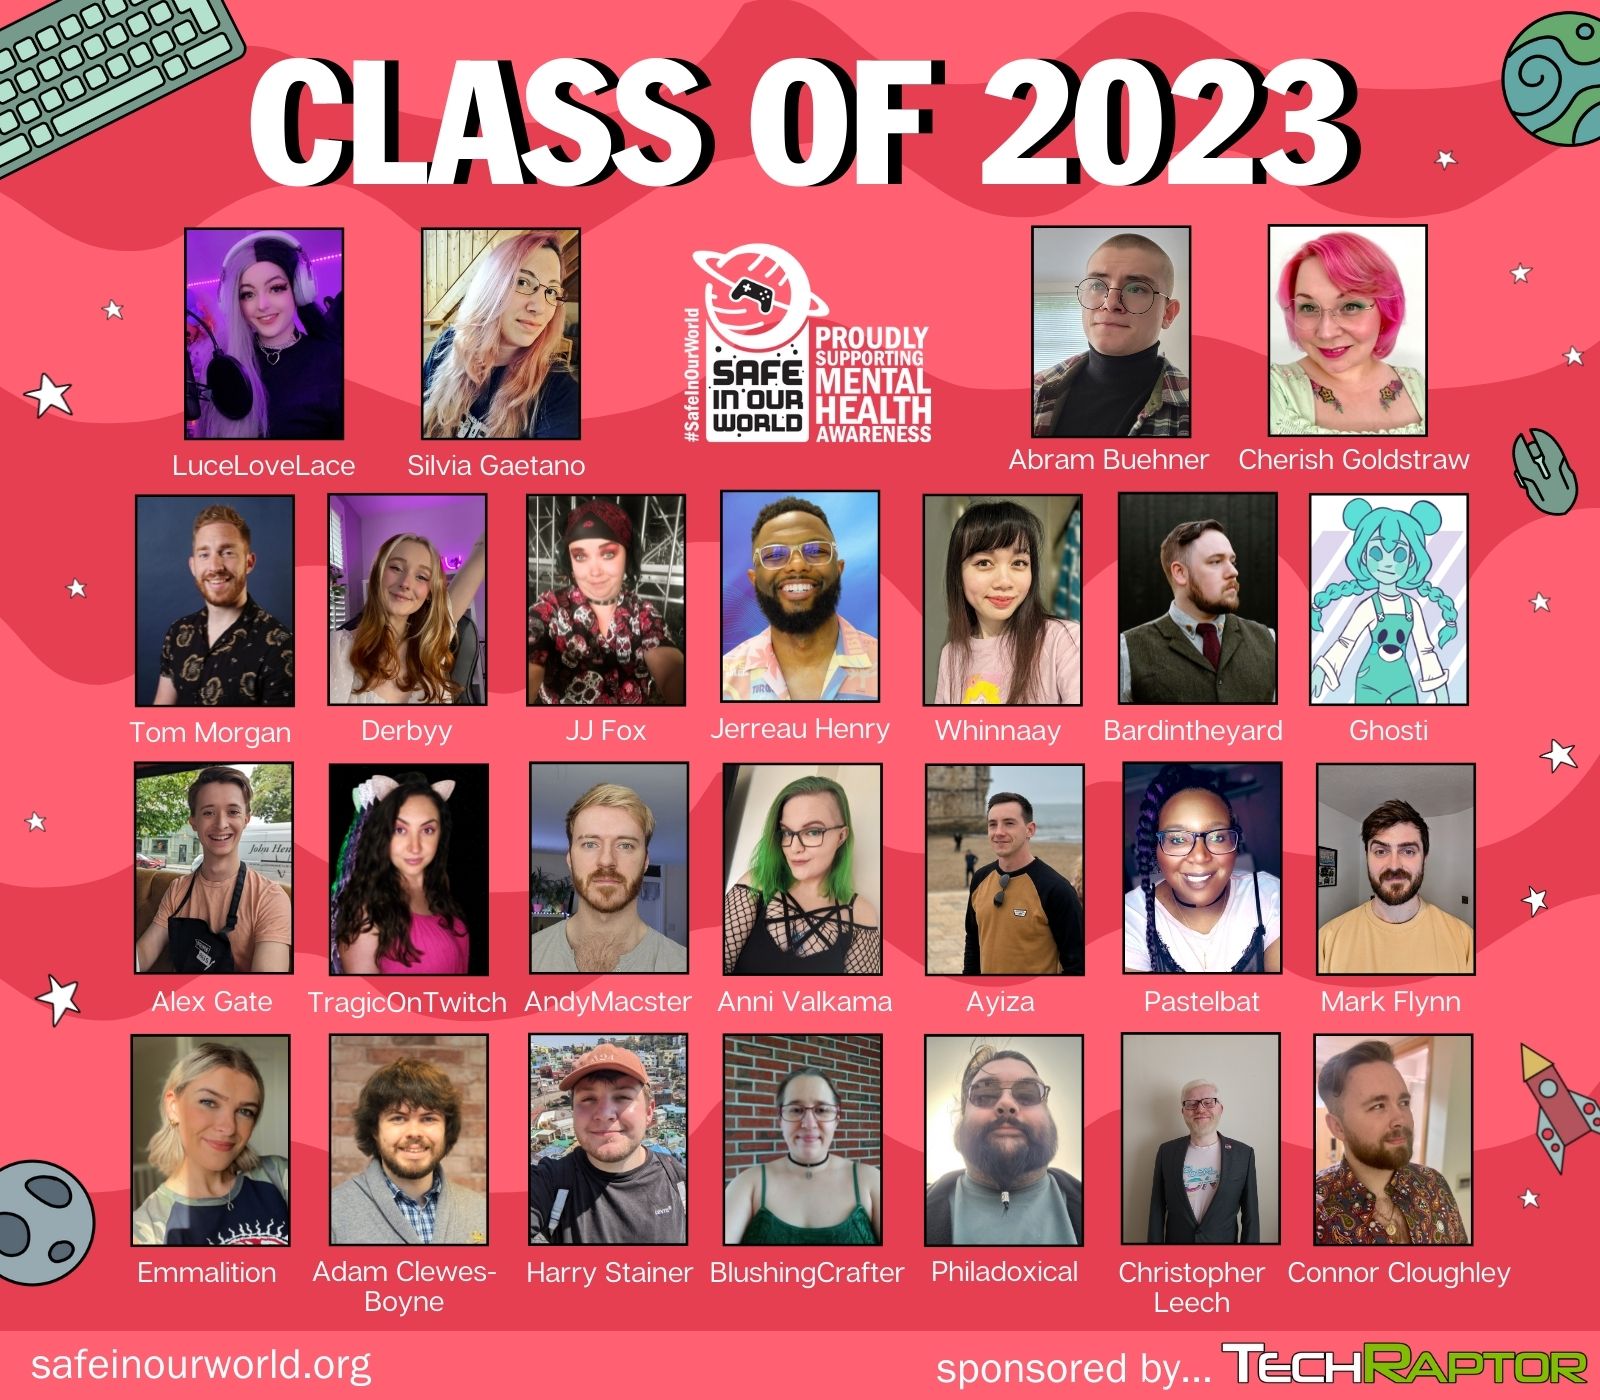 An image of 25 people's portraits on a SIOW pink/red background, with their names. Title reads 'Class of 2023' in bold white letters. There is a banner at the bottom with text 'sponsored by Techraptor'